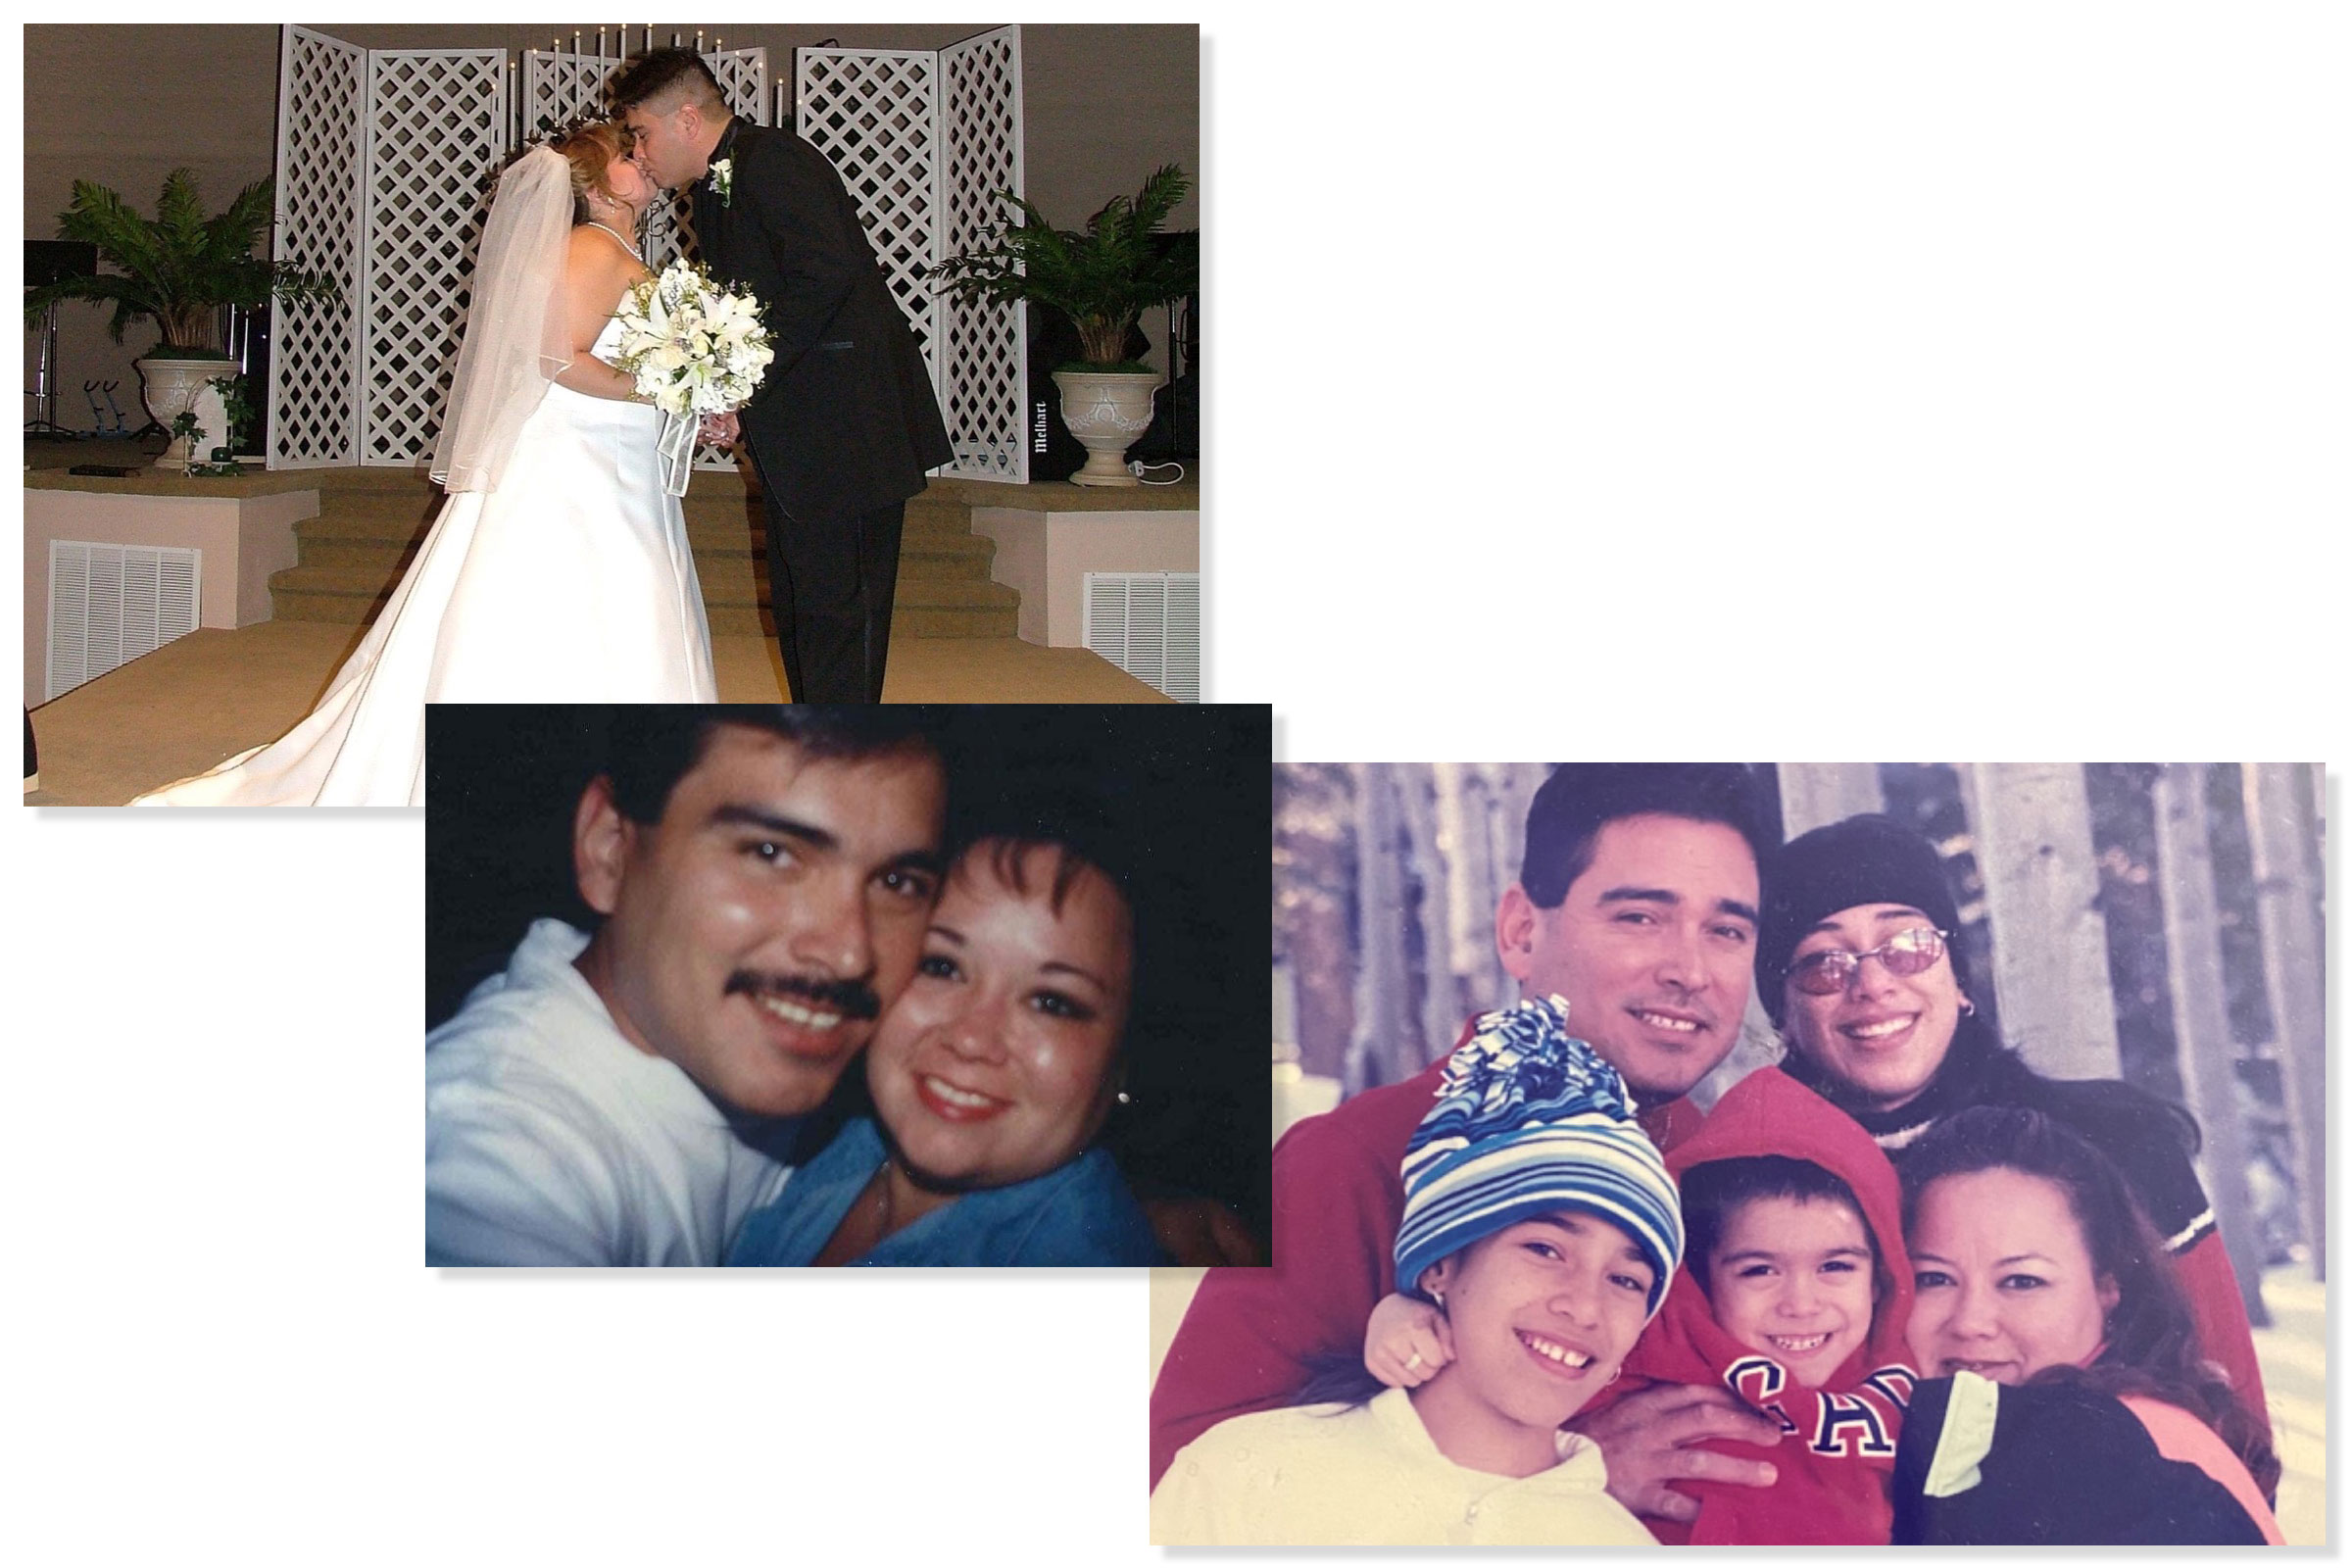 Randy Hinojosa and his late wife Elisa are pictured, top left, at their wedding in 2003. The two met 26 years ago. They share three children, including a 23-year-old son and two daughters, age 28 and 31. Elisa died of COVID-19 in a Texas hospital on Oct. 25. (Courtesy of Hinojosa Family)